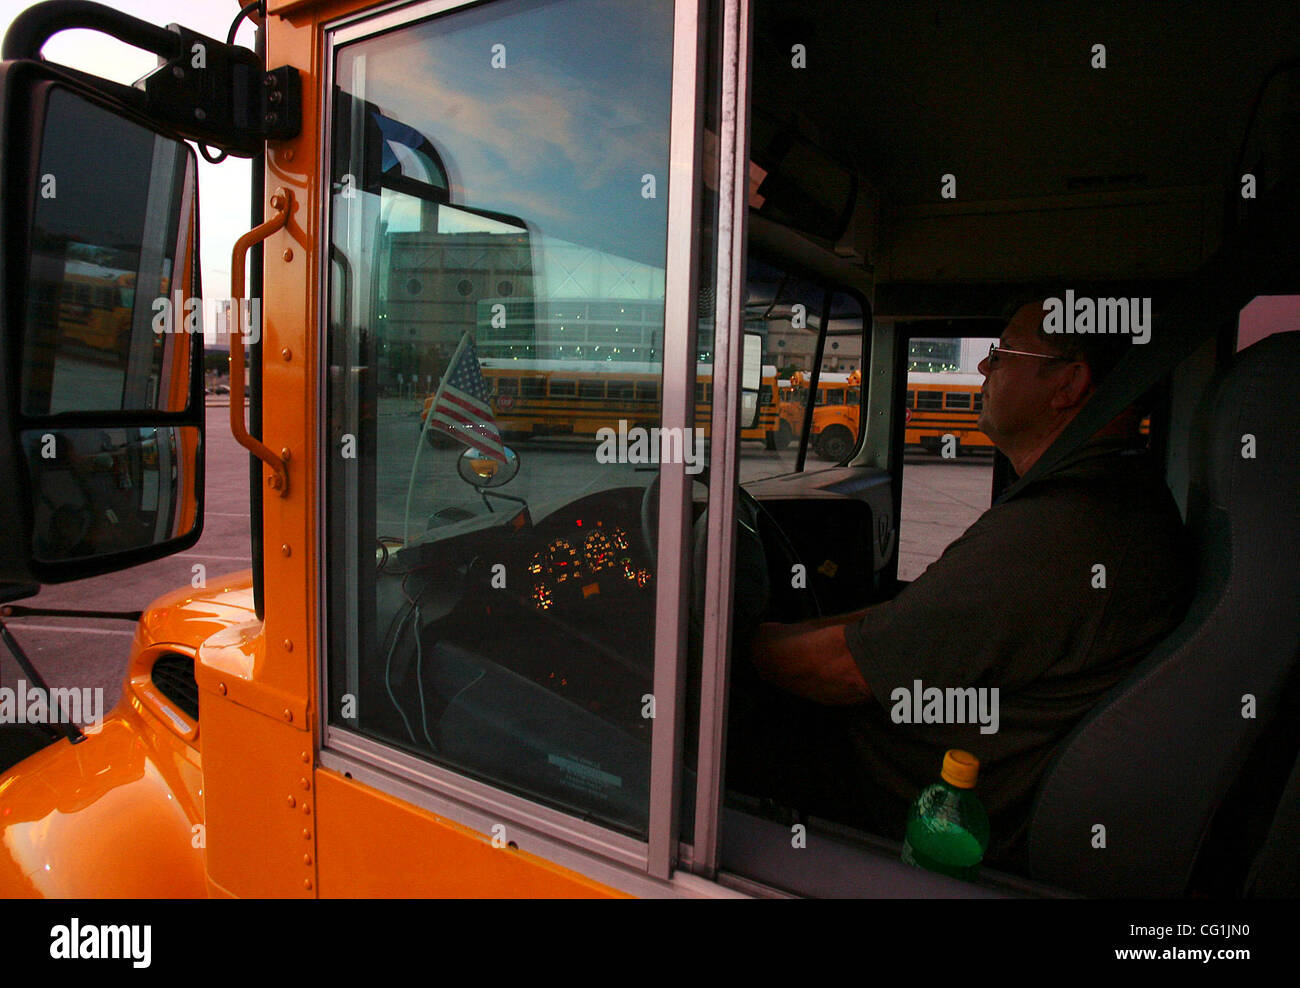 FOR METRO - Dallas County Schools bus driver Charles Frazier takes other drivers to a local hotel Saturday Aug. 18 2007 from the Alamodome. 100 school buses from Dallas County Schools are are part of the emergency plan in prepartion for Hurricane Dean. (PHOTO BY EDWARD A. ORNELAS) Stock Photo